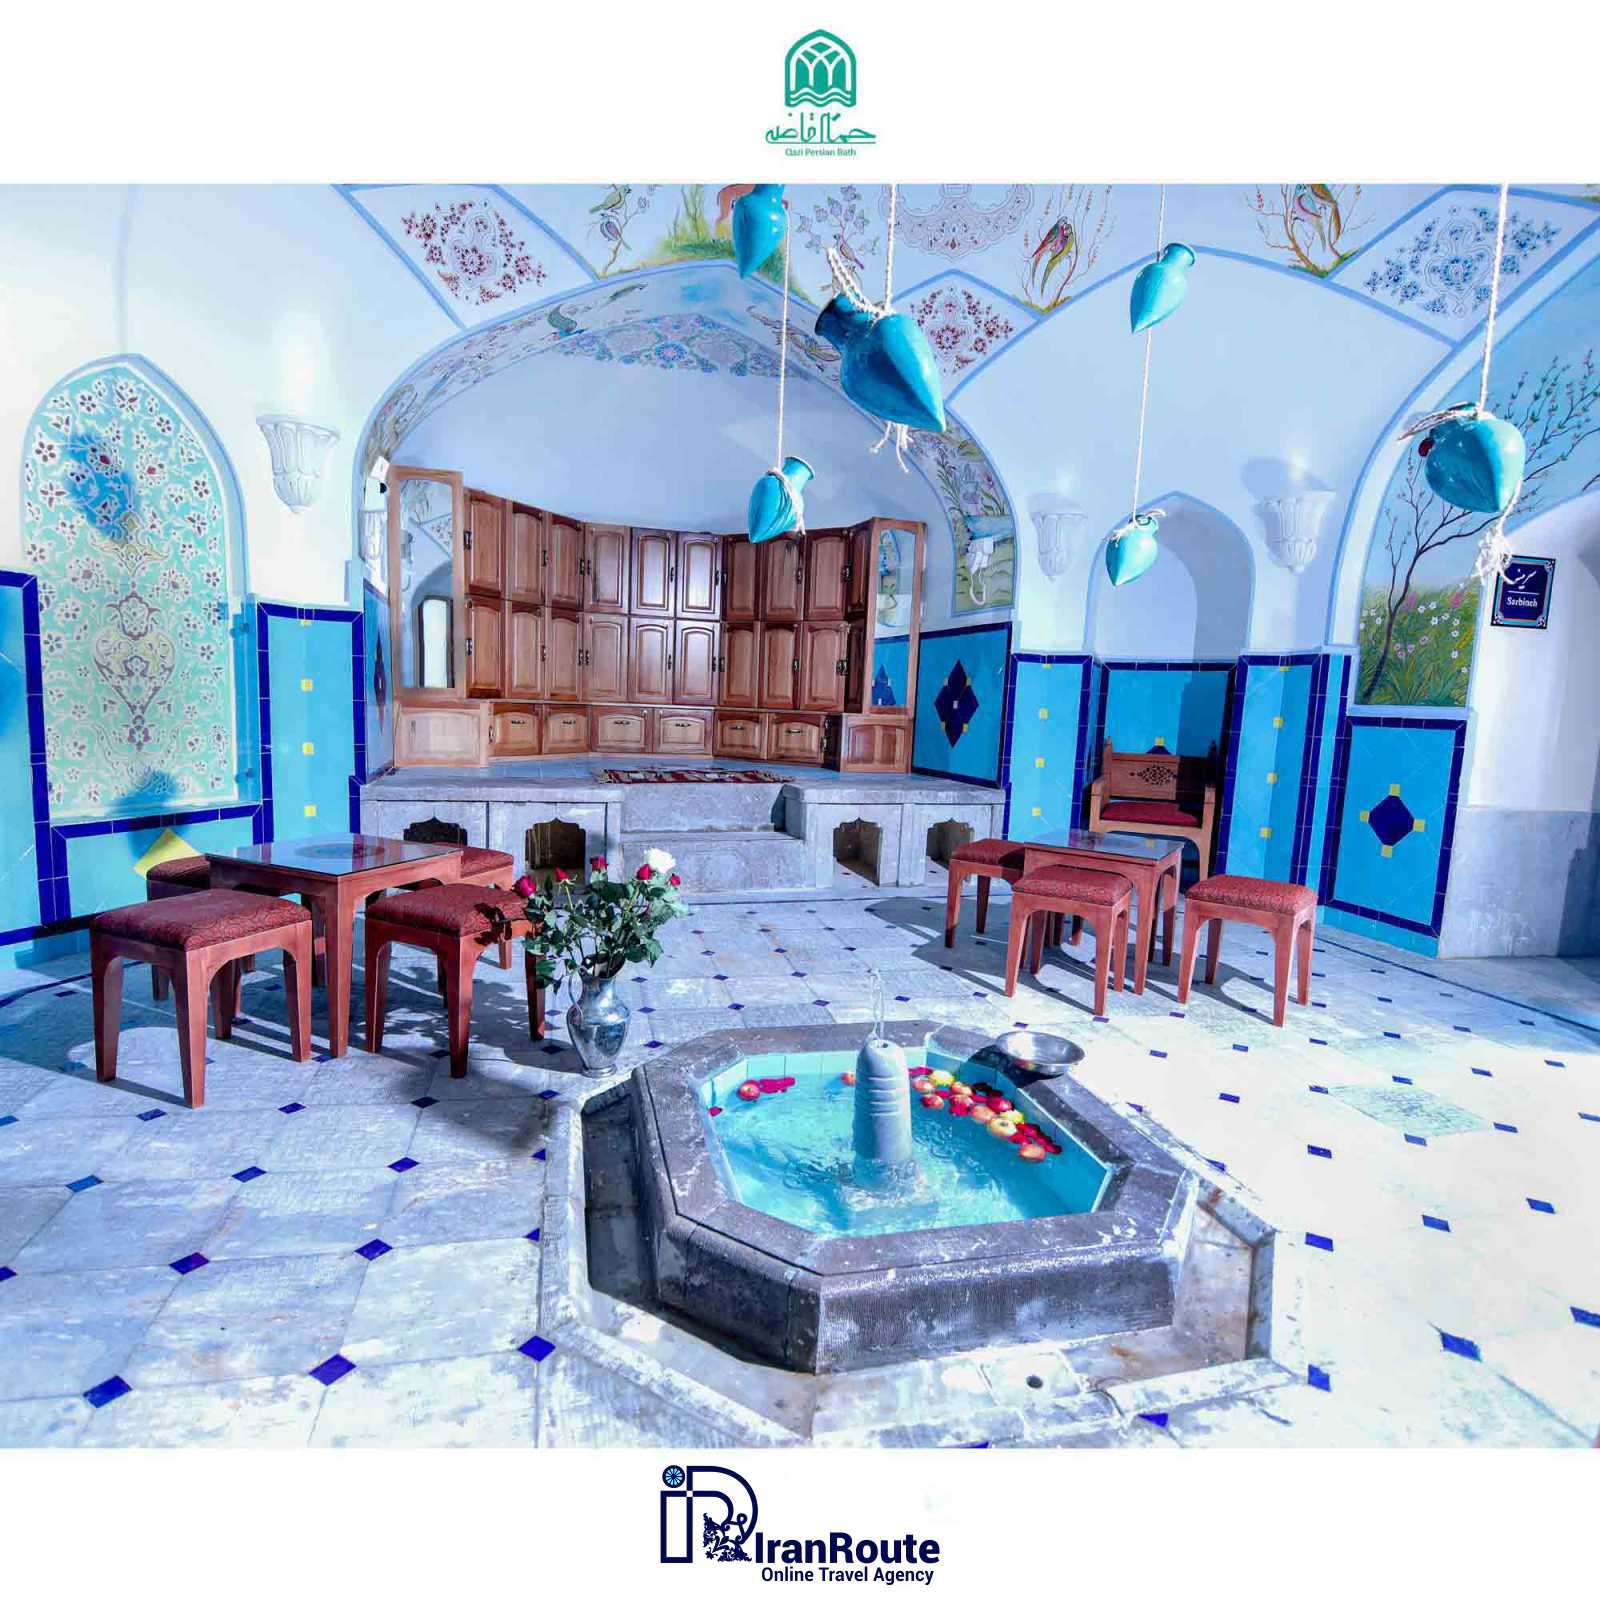 Relaxing at the Traditional Iranian Bathhouse